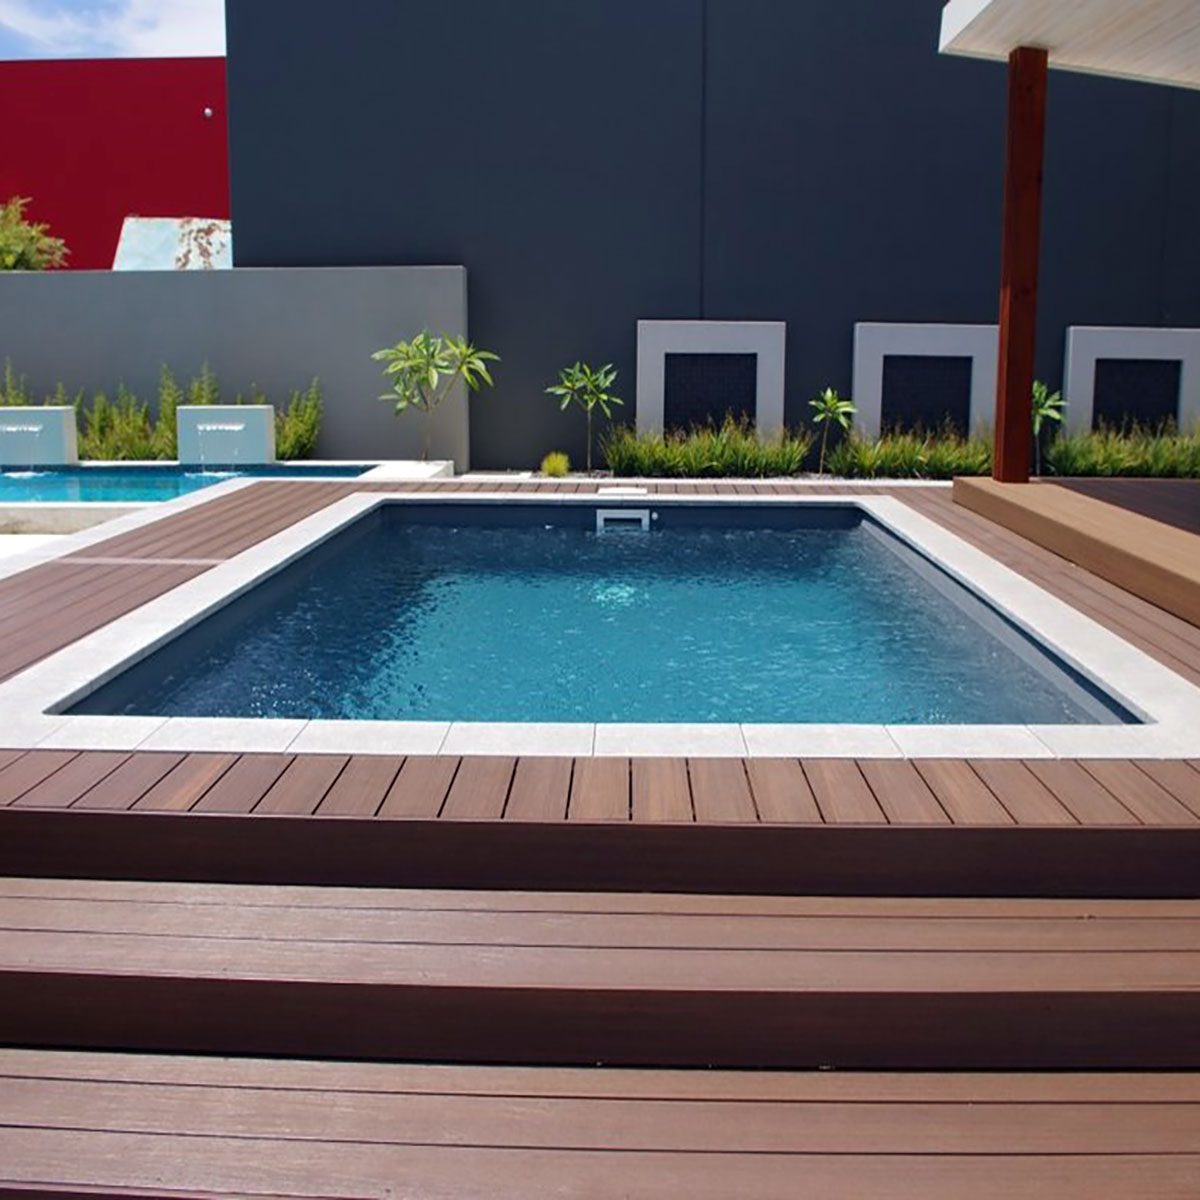 NewTechWood Might Be the Best Composite Decking—Find Out Why